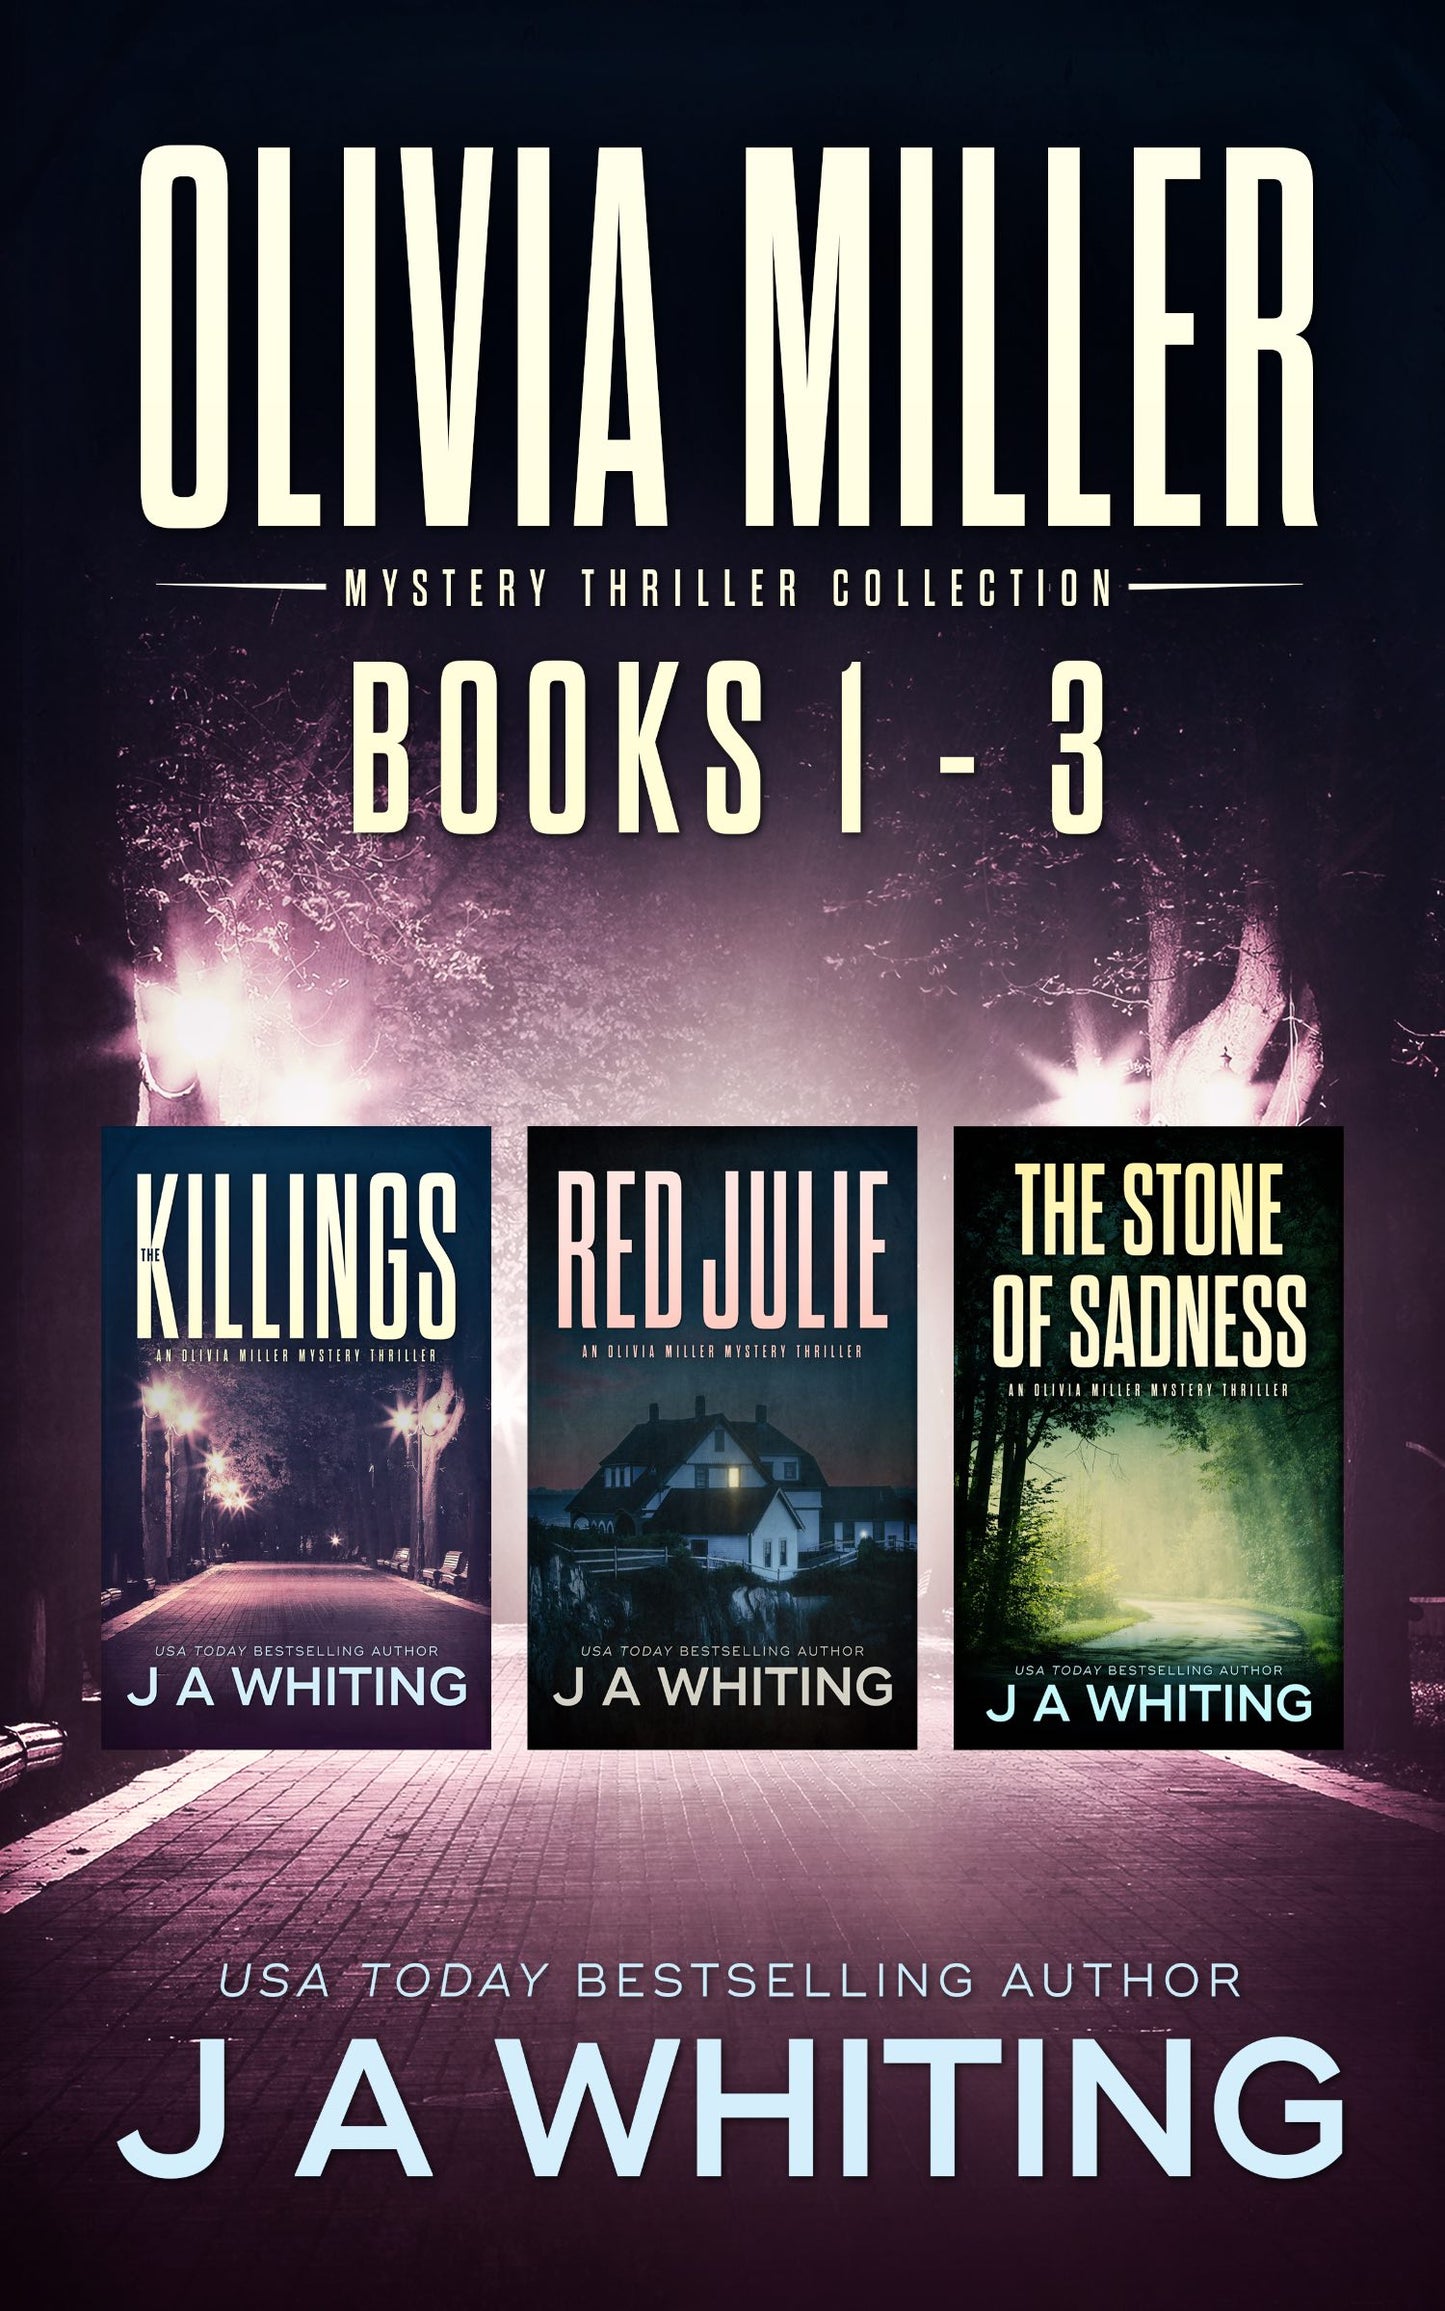 Olivia Miller Mystery Thriller Collection Books 1 - 3 (EBOOK)